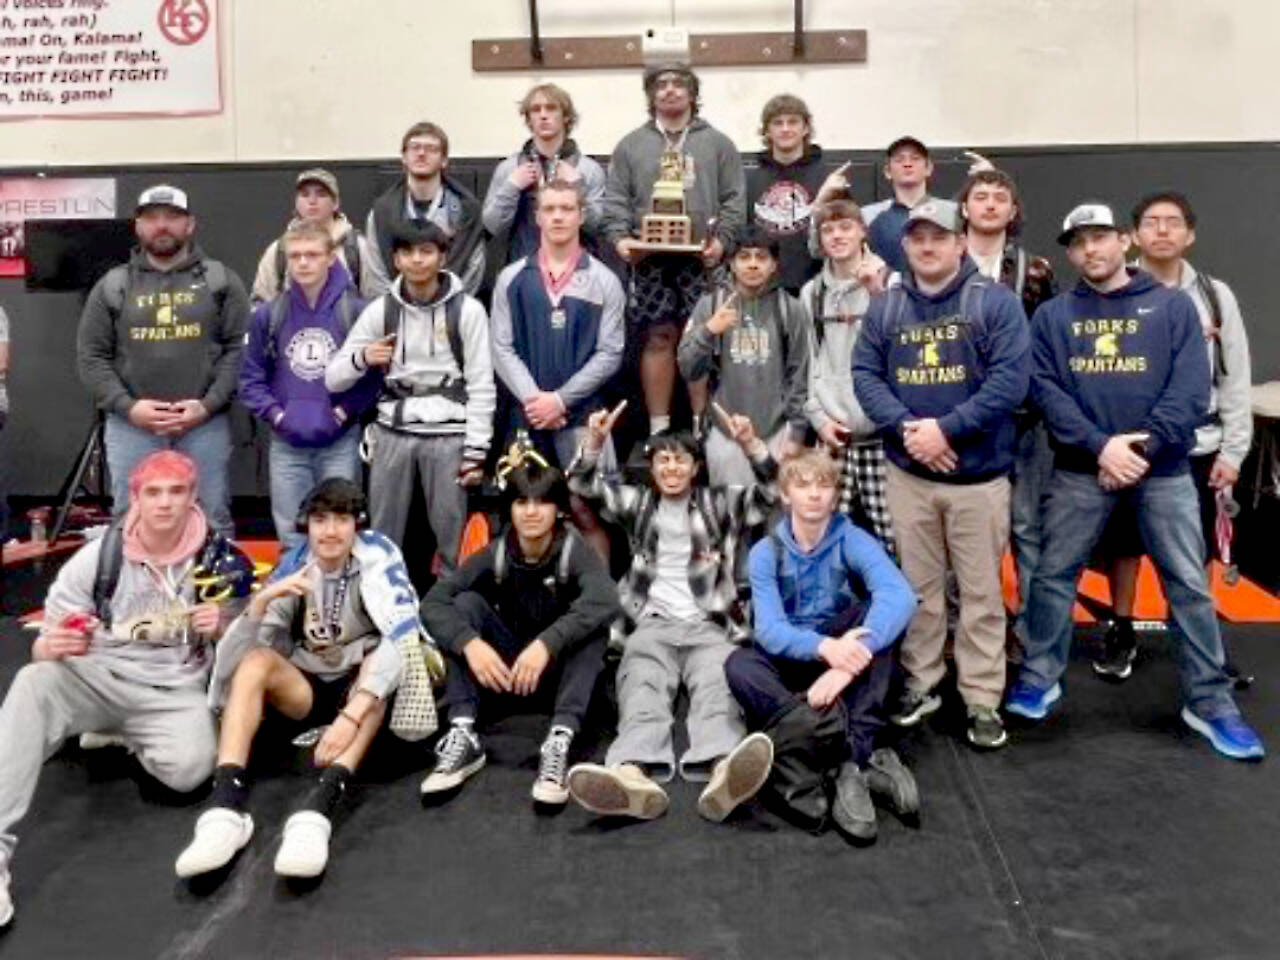 The Forks boys wrestling team celebrates its subregionals championship this weekend. (Forks High School)